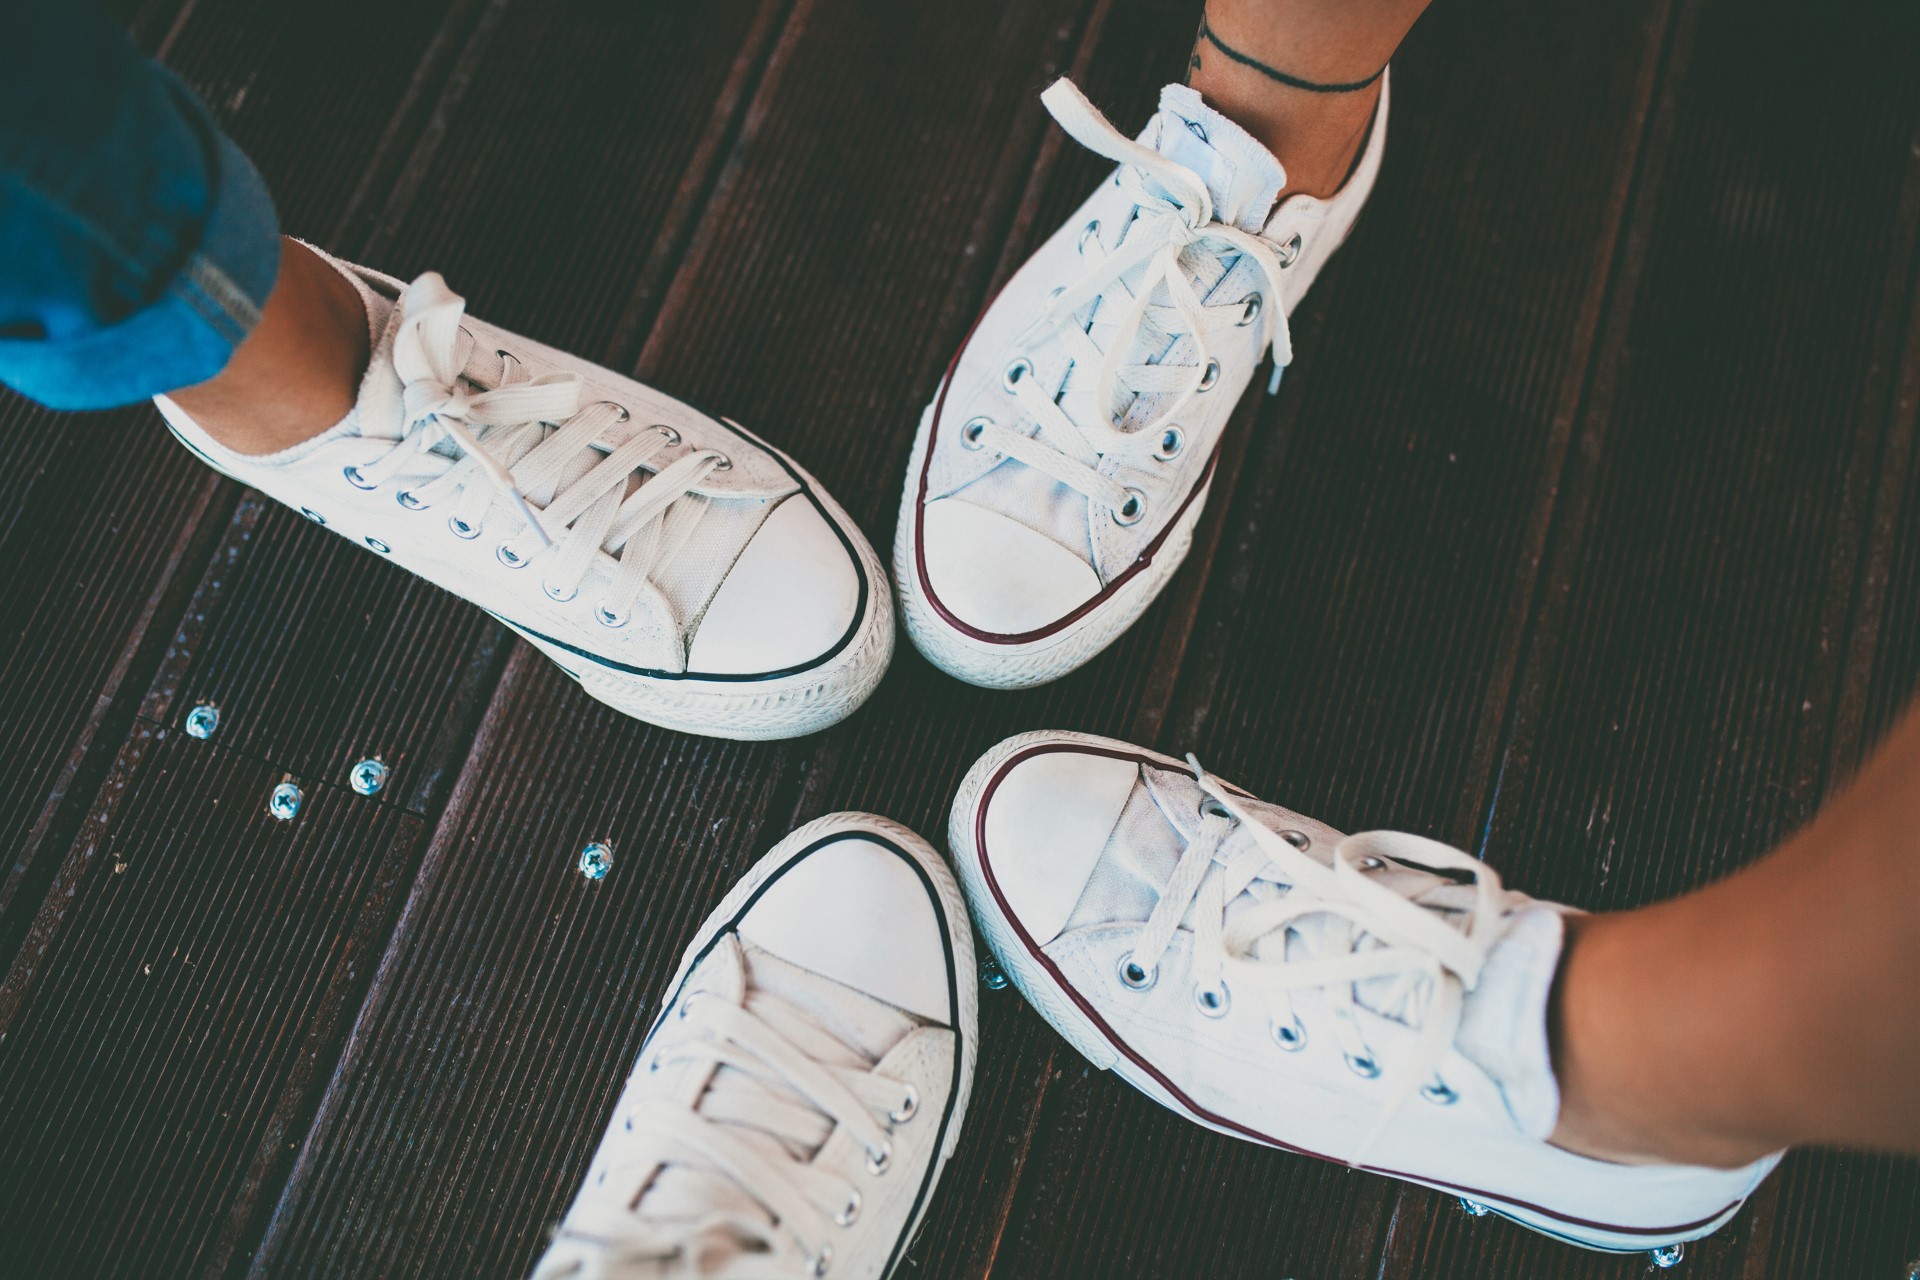 Closeup of hipster shoes. Best friends wearing same white footwear. White sneakers over wooden floor